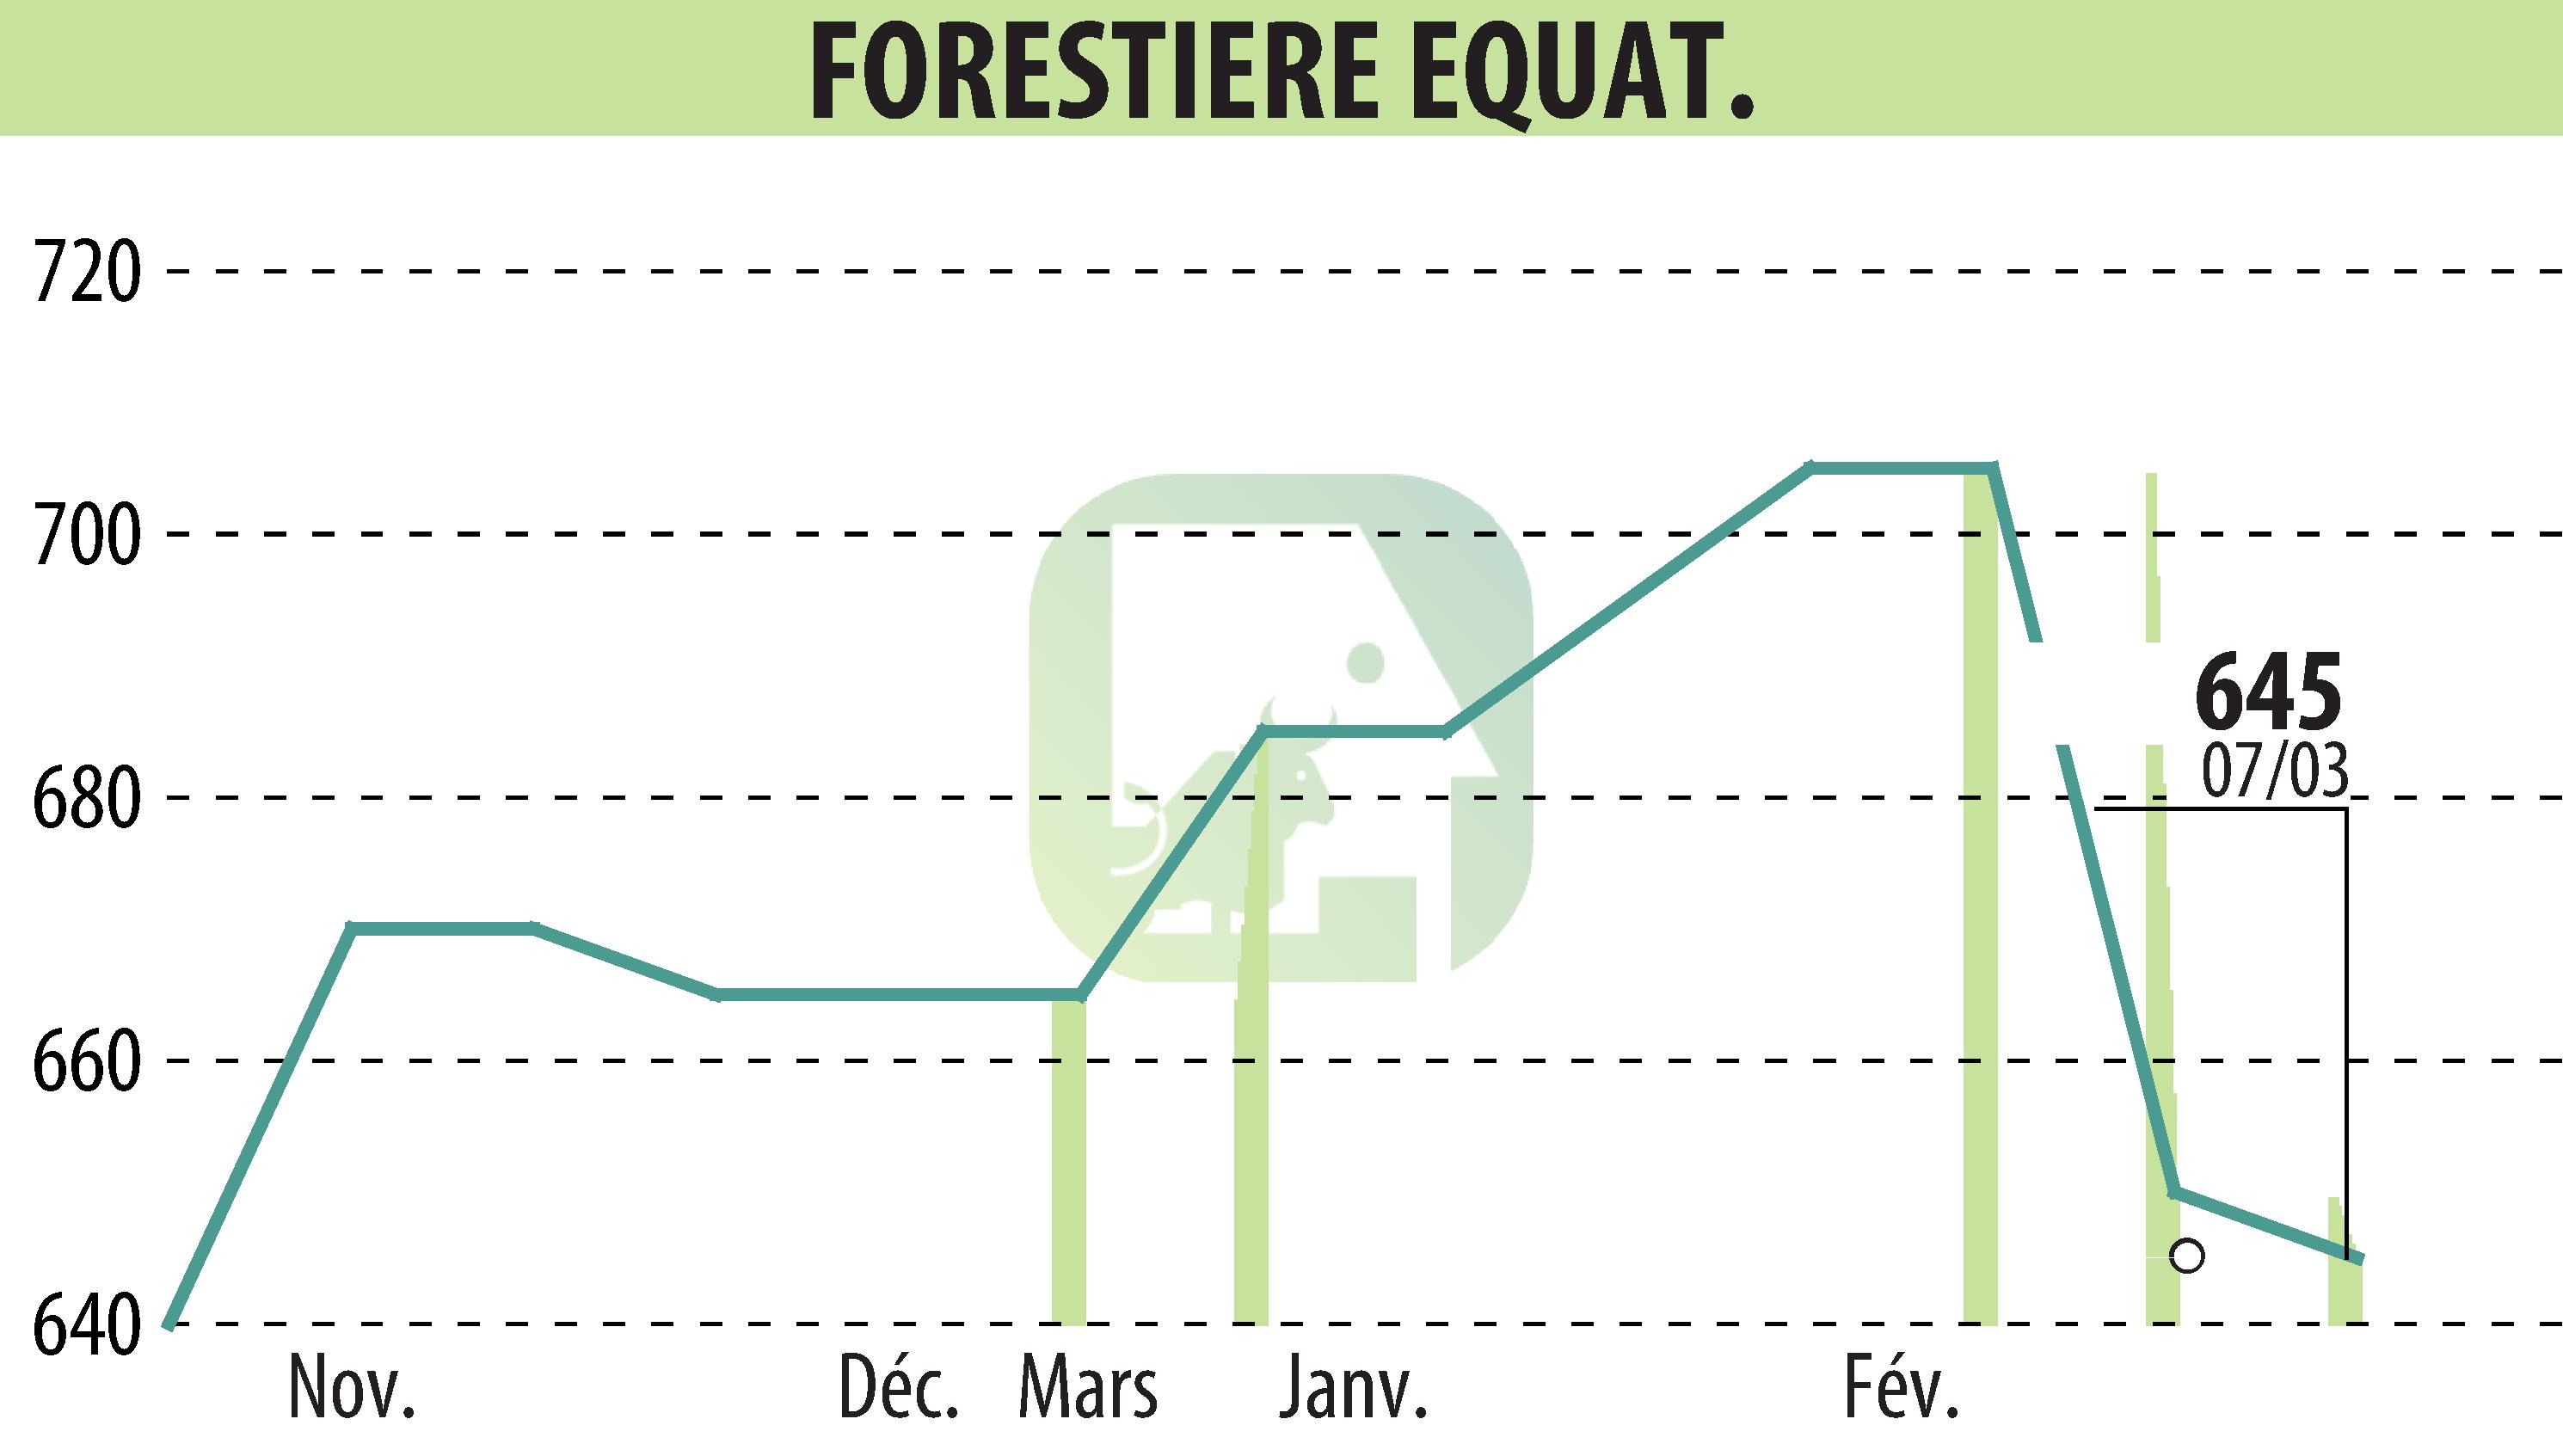 Stock price chart of FORESTIERE EQUATORIALE  (EPA:FORE) showing fluctuations.